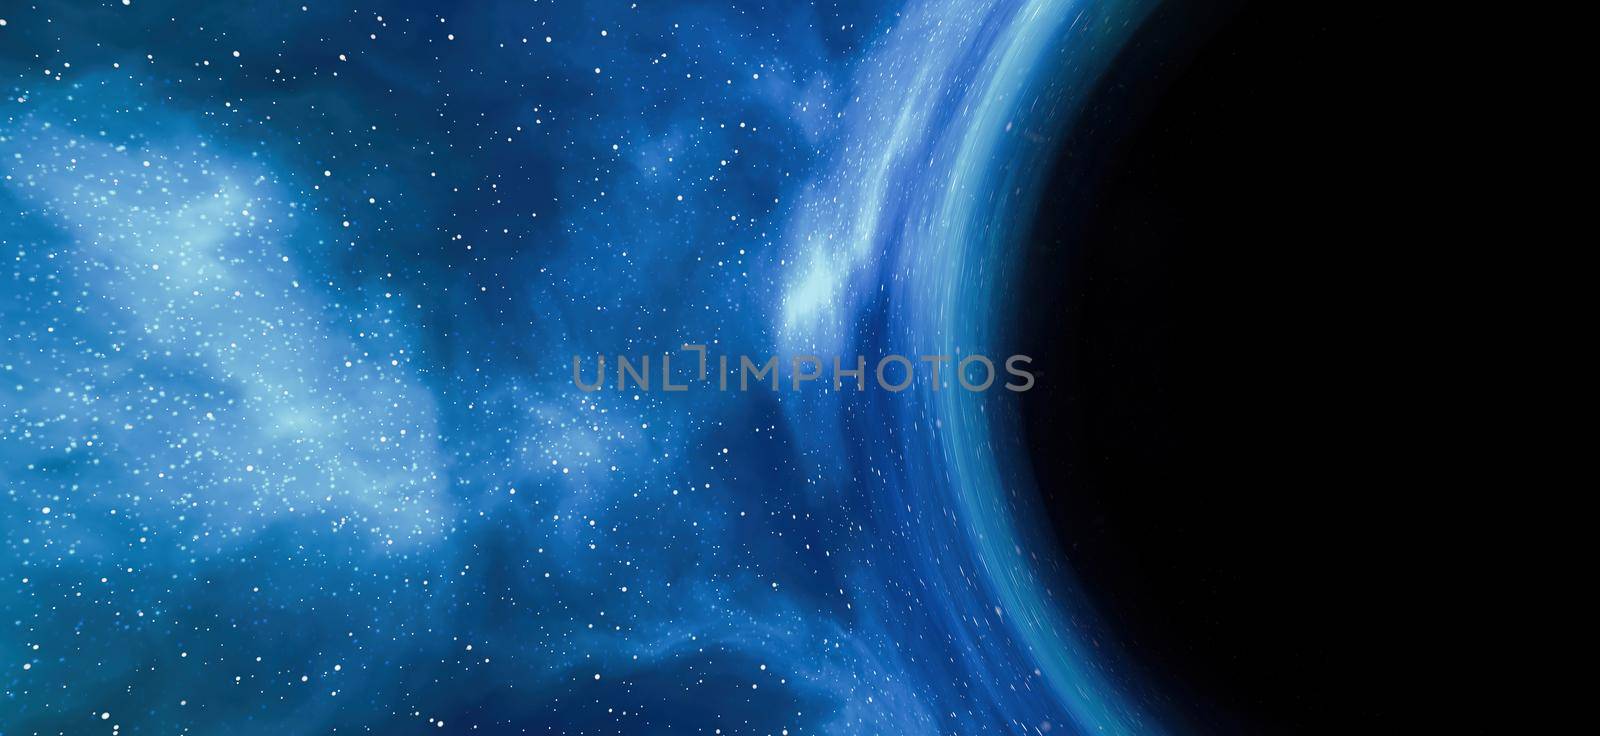 abstract background of black hole with stars and blue nebulosity around. deep space, unknown. 3d render